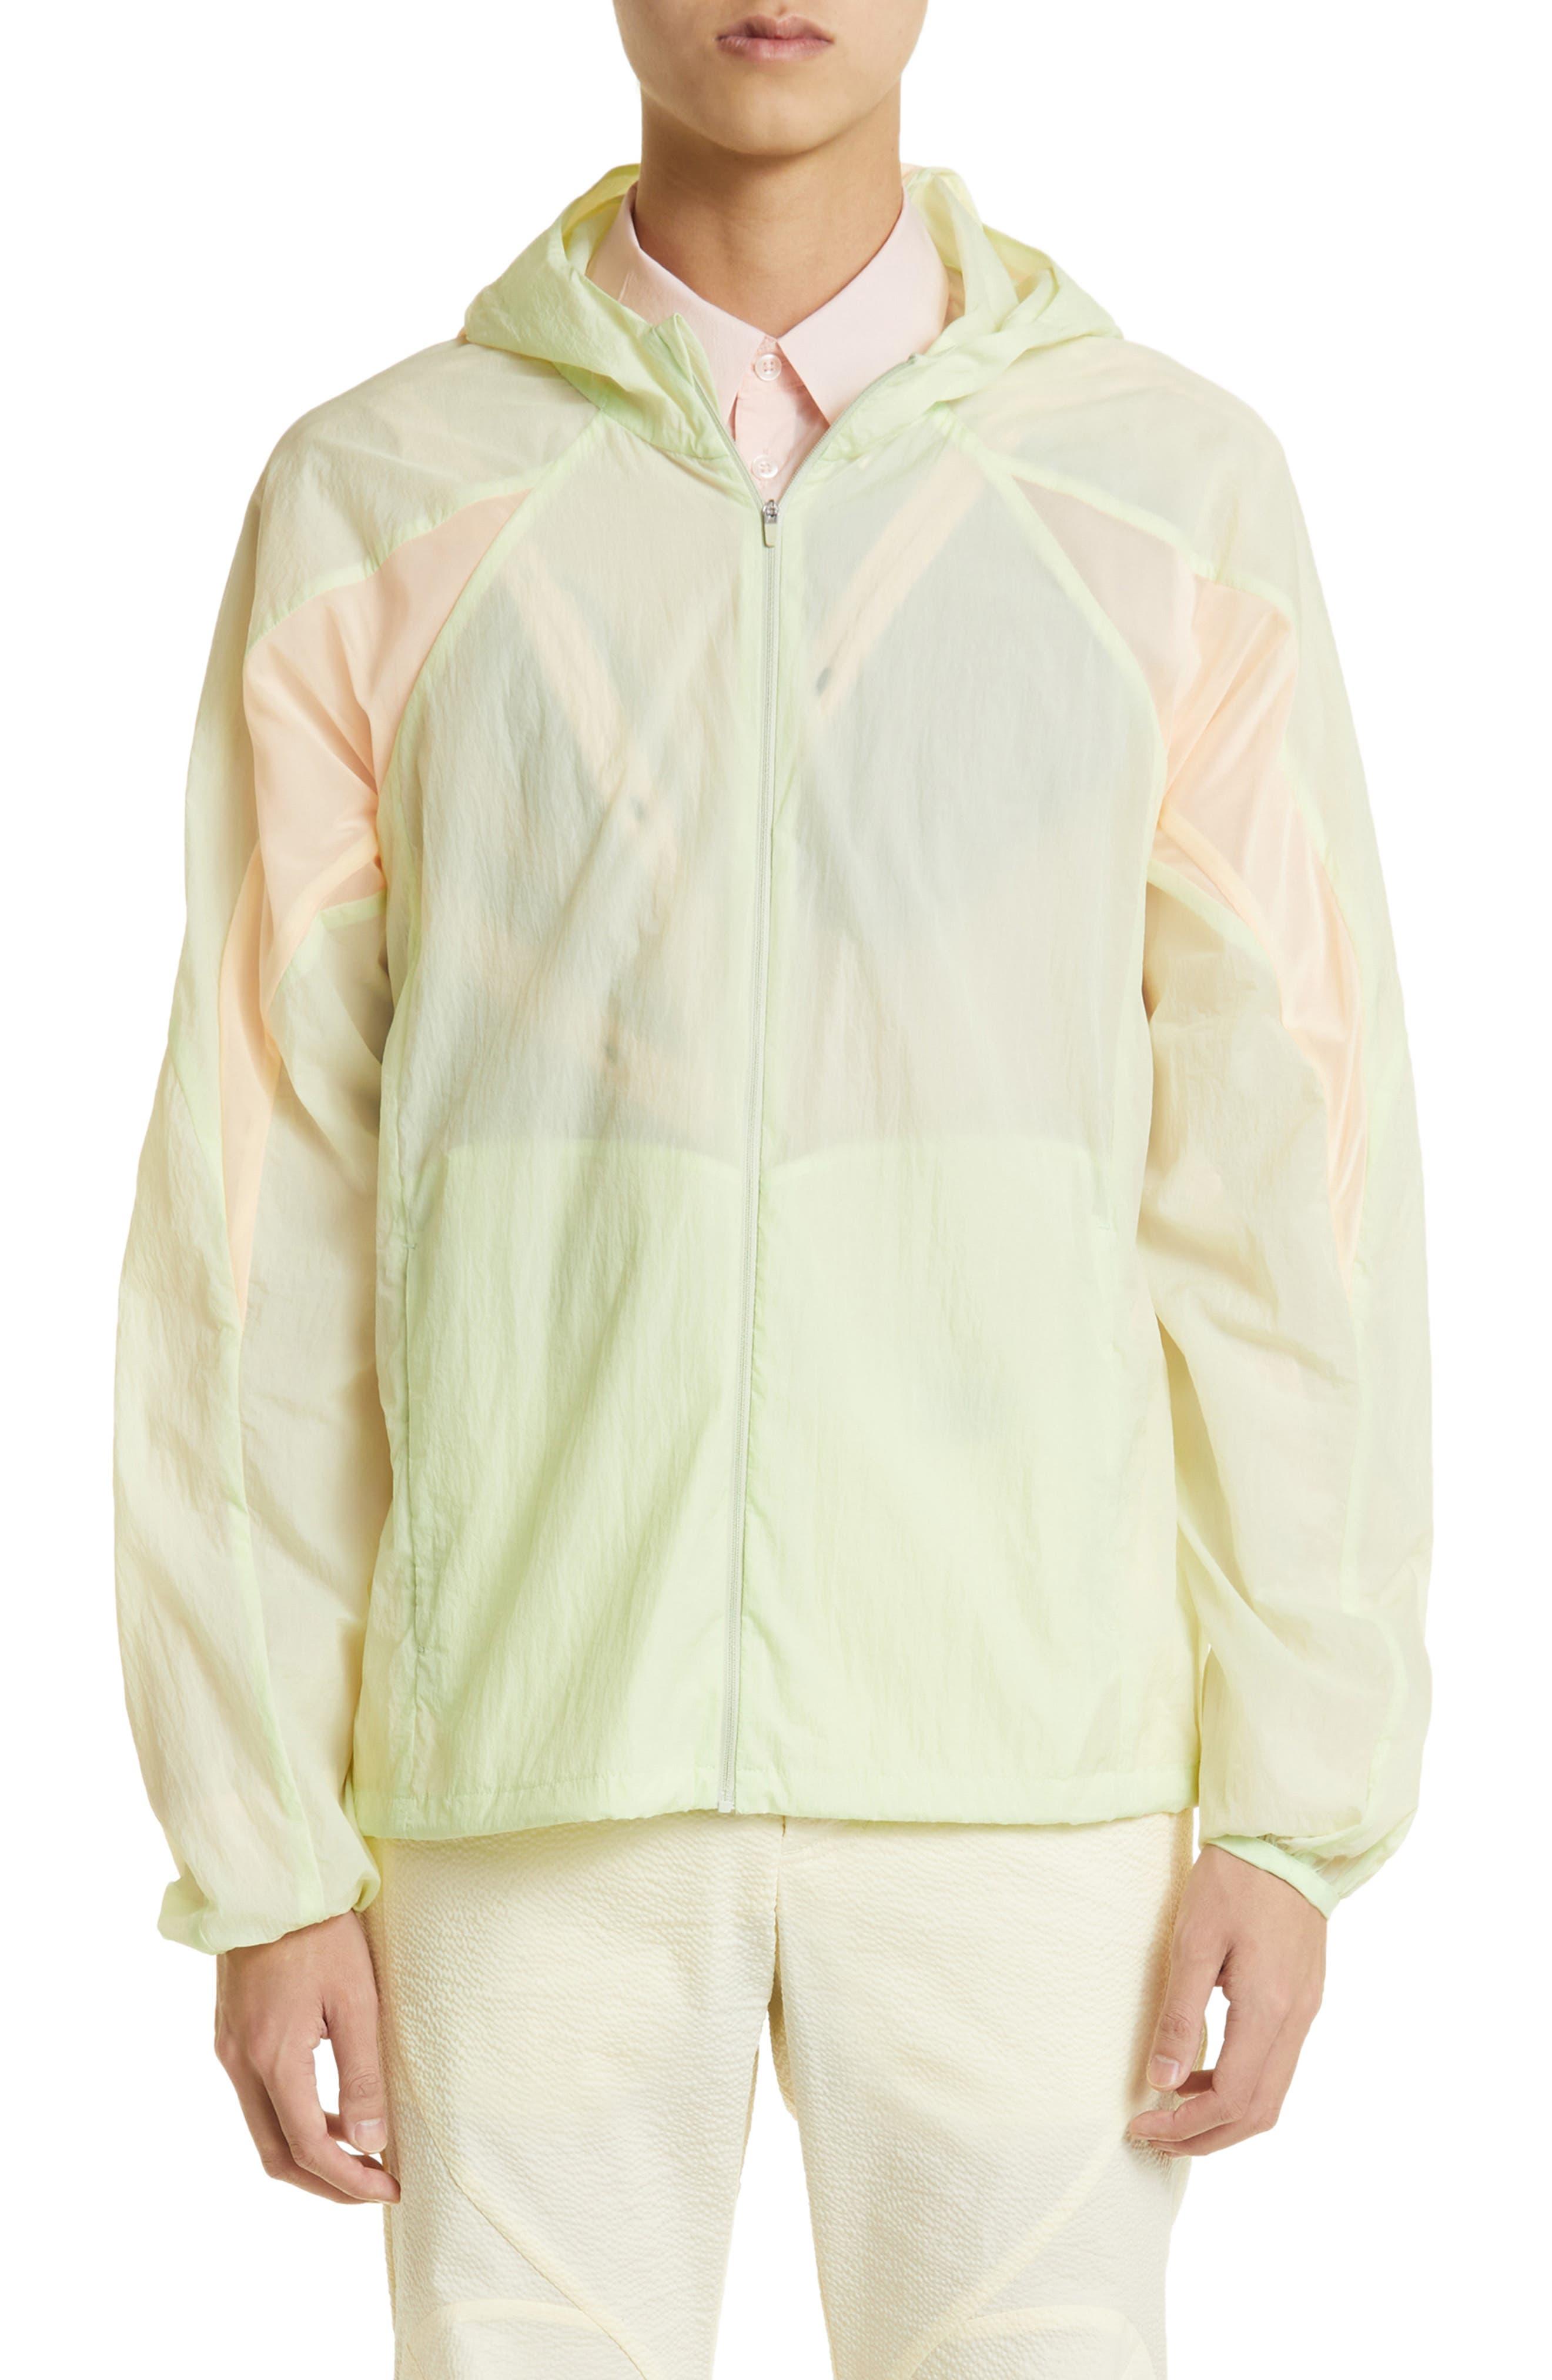 Post Archive Faction PAF 5.0 Technical Jacket Right in Yellow for